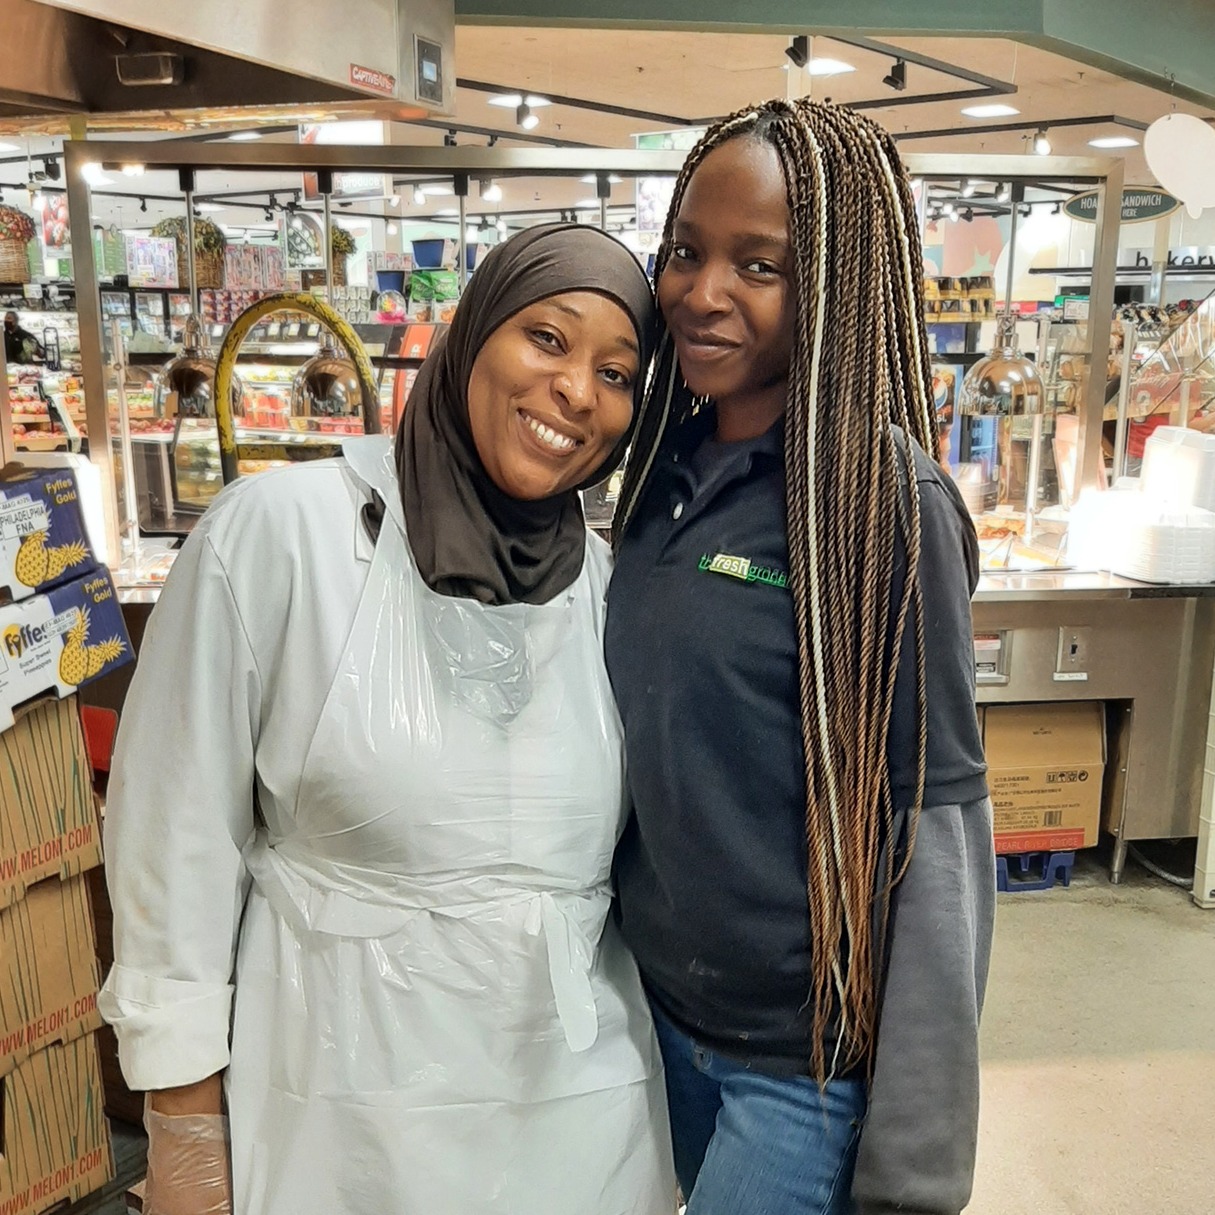 Two UFCW Local 152 members from Fresh Grocer: Habibatou and Camiyyah